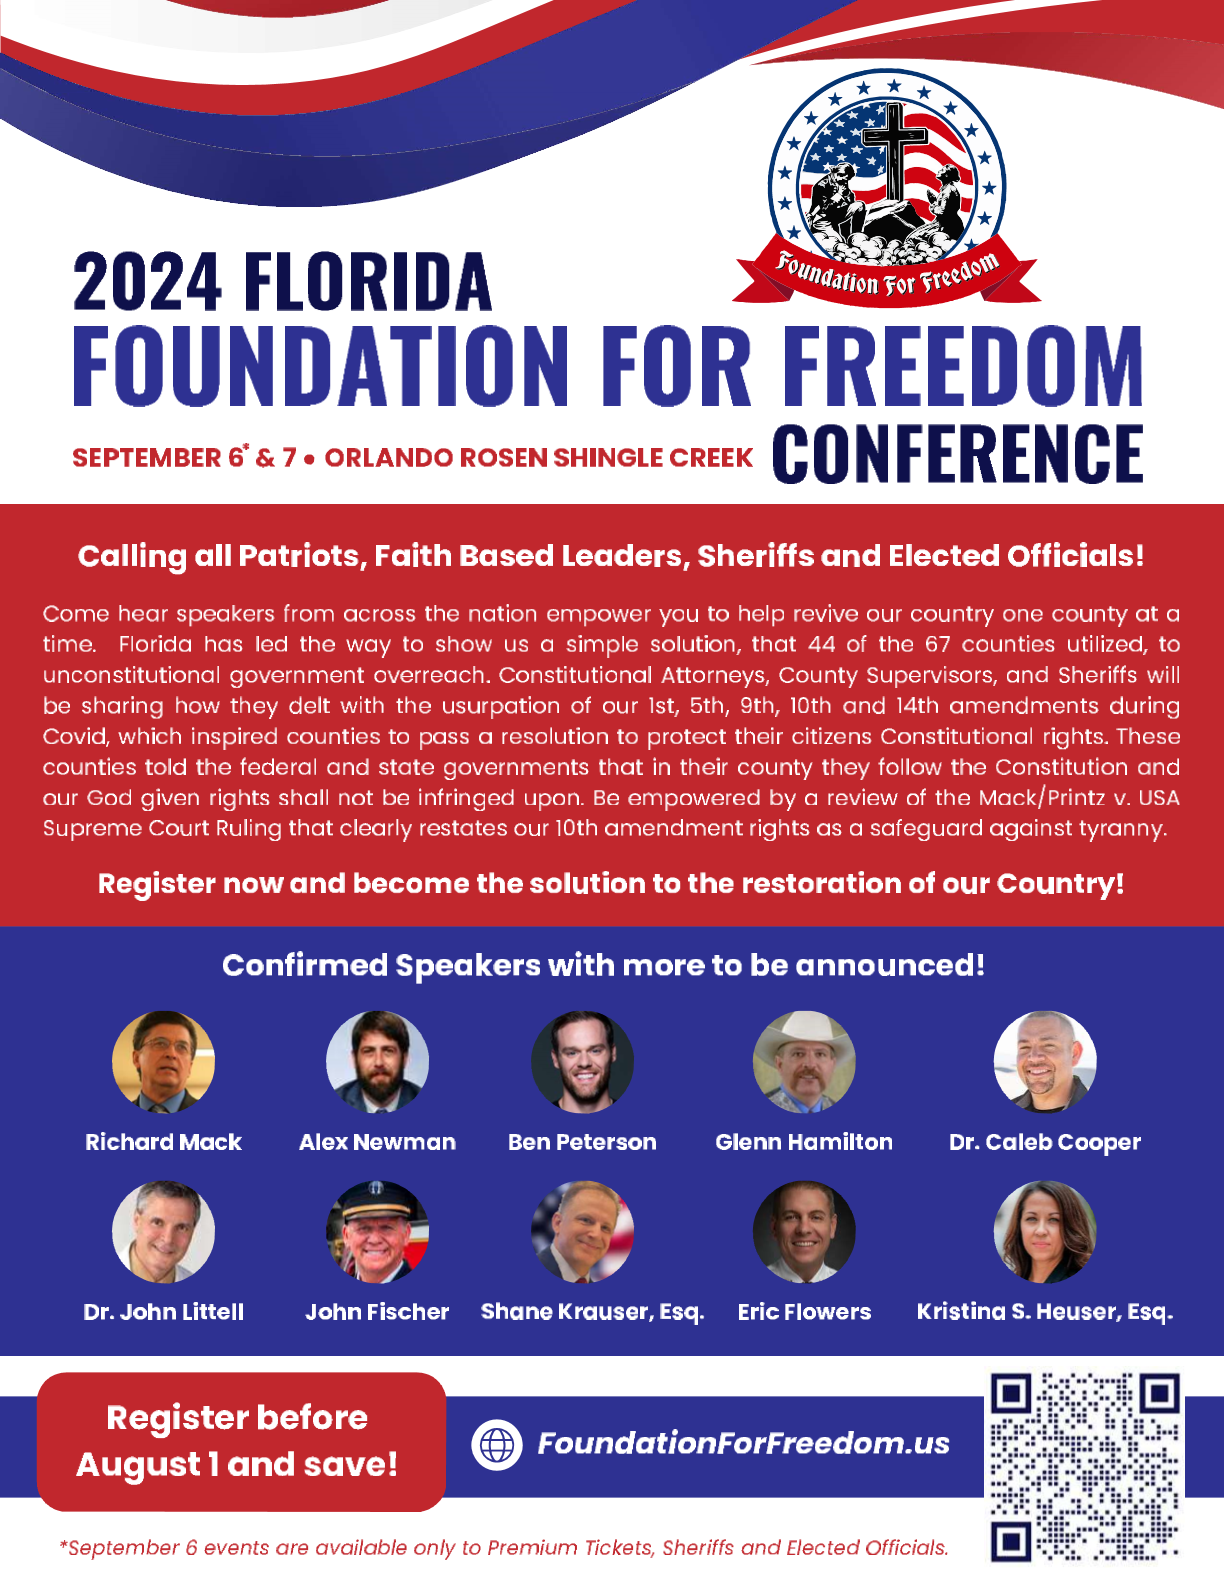 2024 Florida Foundation for Freedom Conference